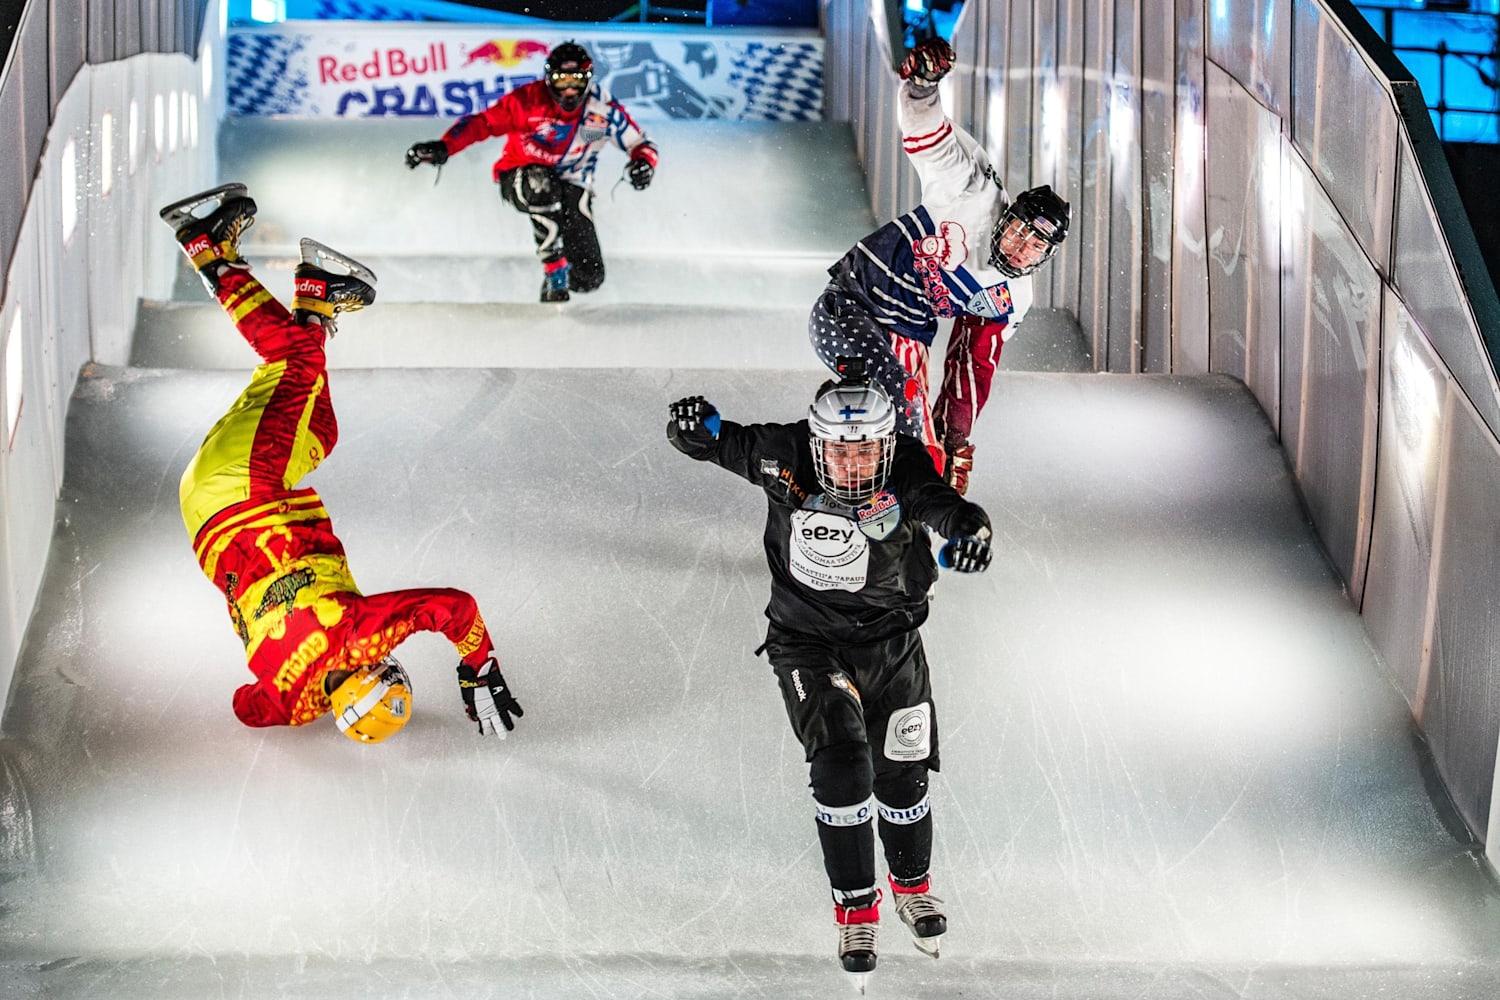 Red Bull Crashed Ice 2017 Ice Cross Downhill is back